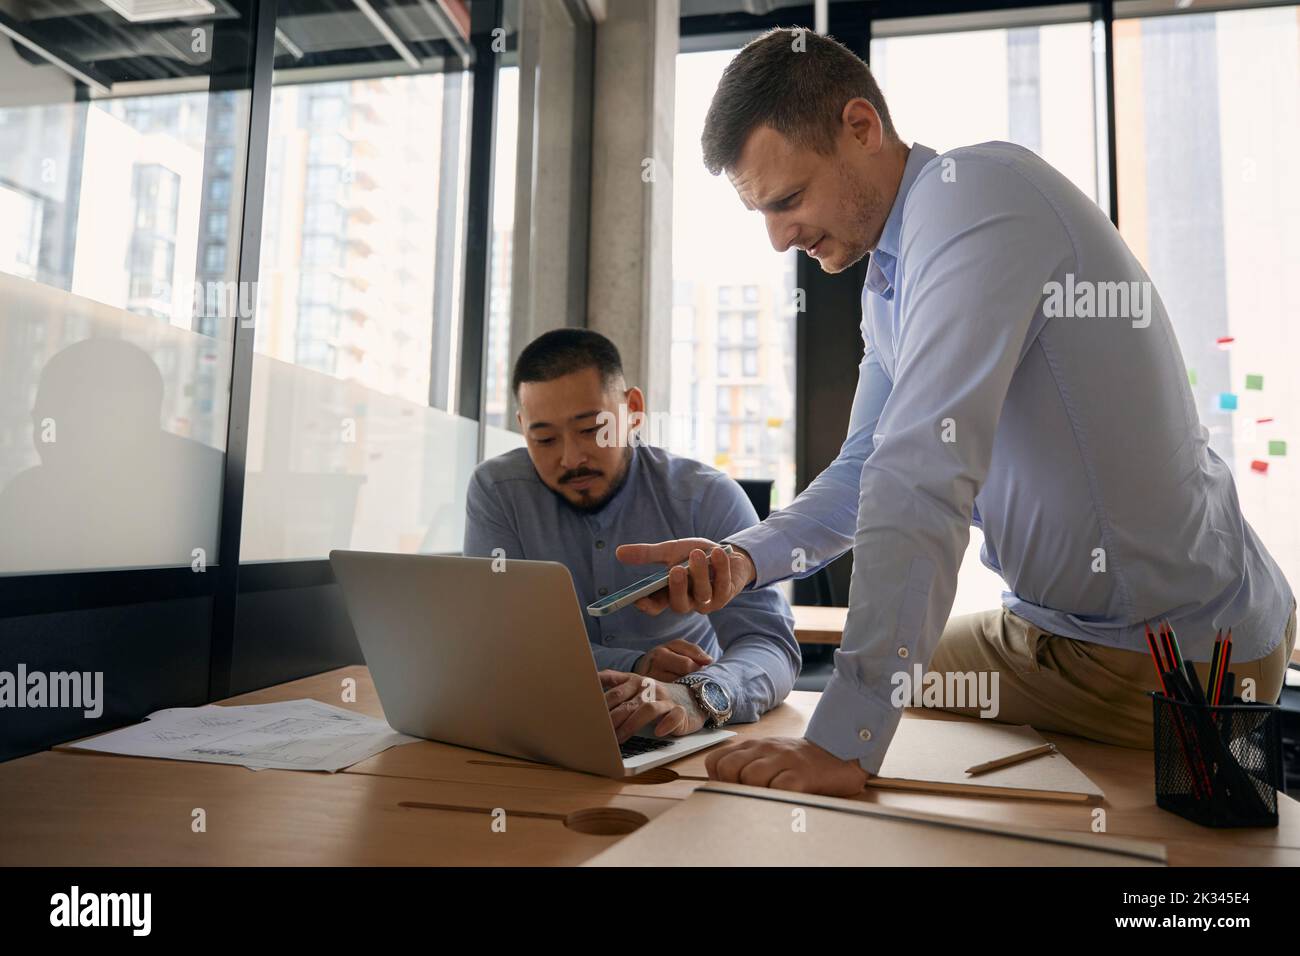 Corporate workers sending files from mobile device to laptop Stock Photo